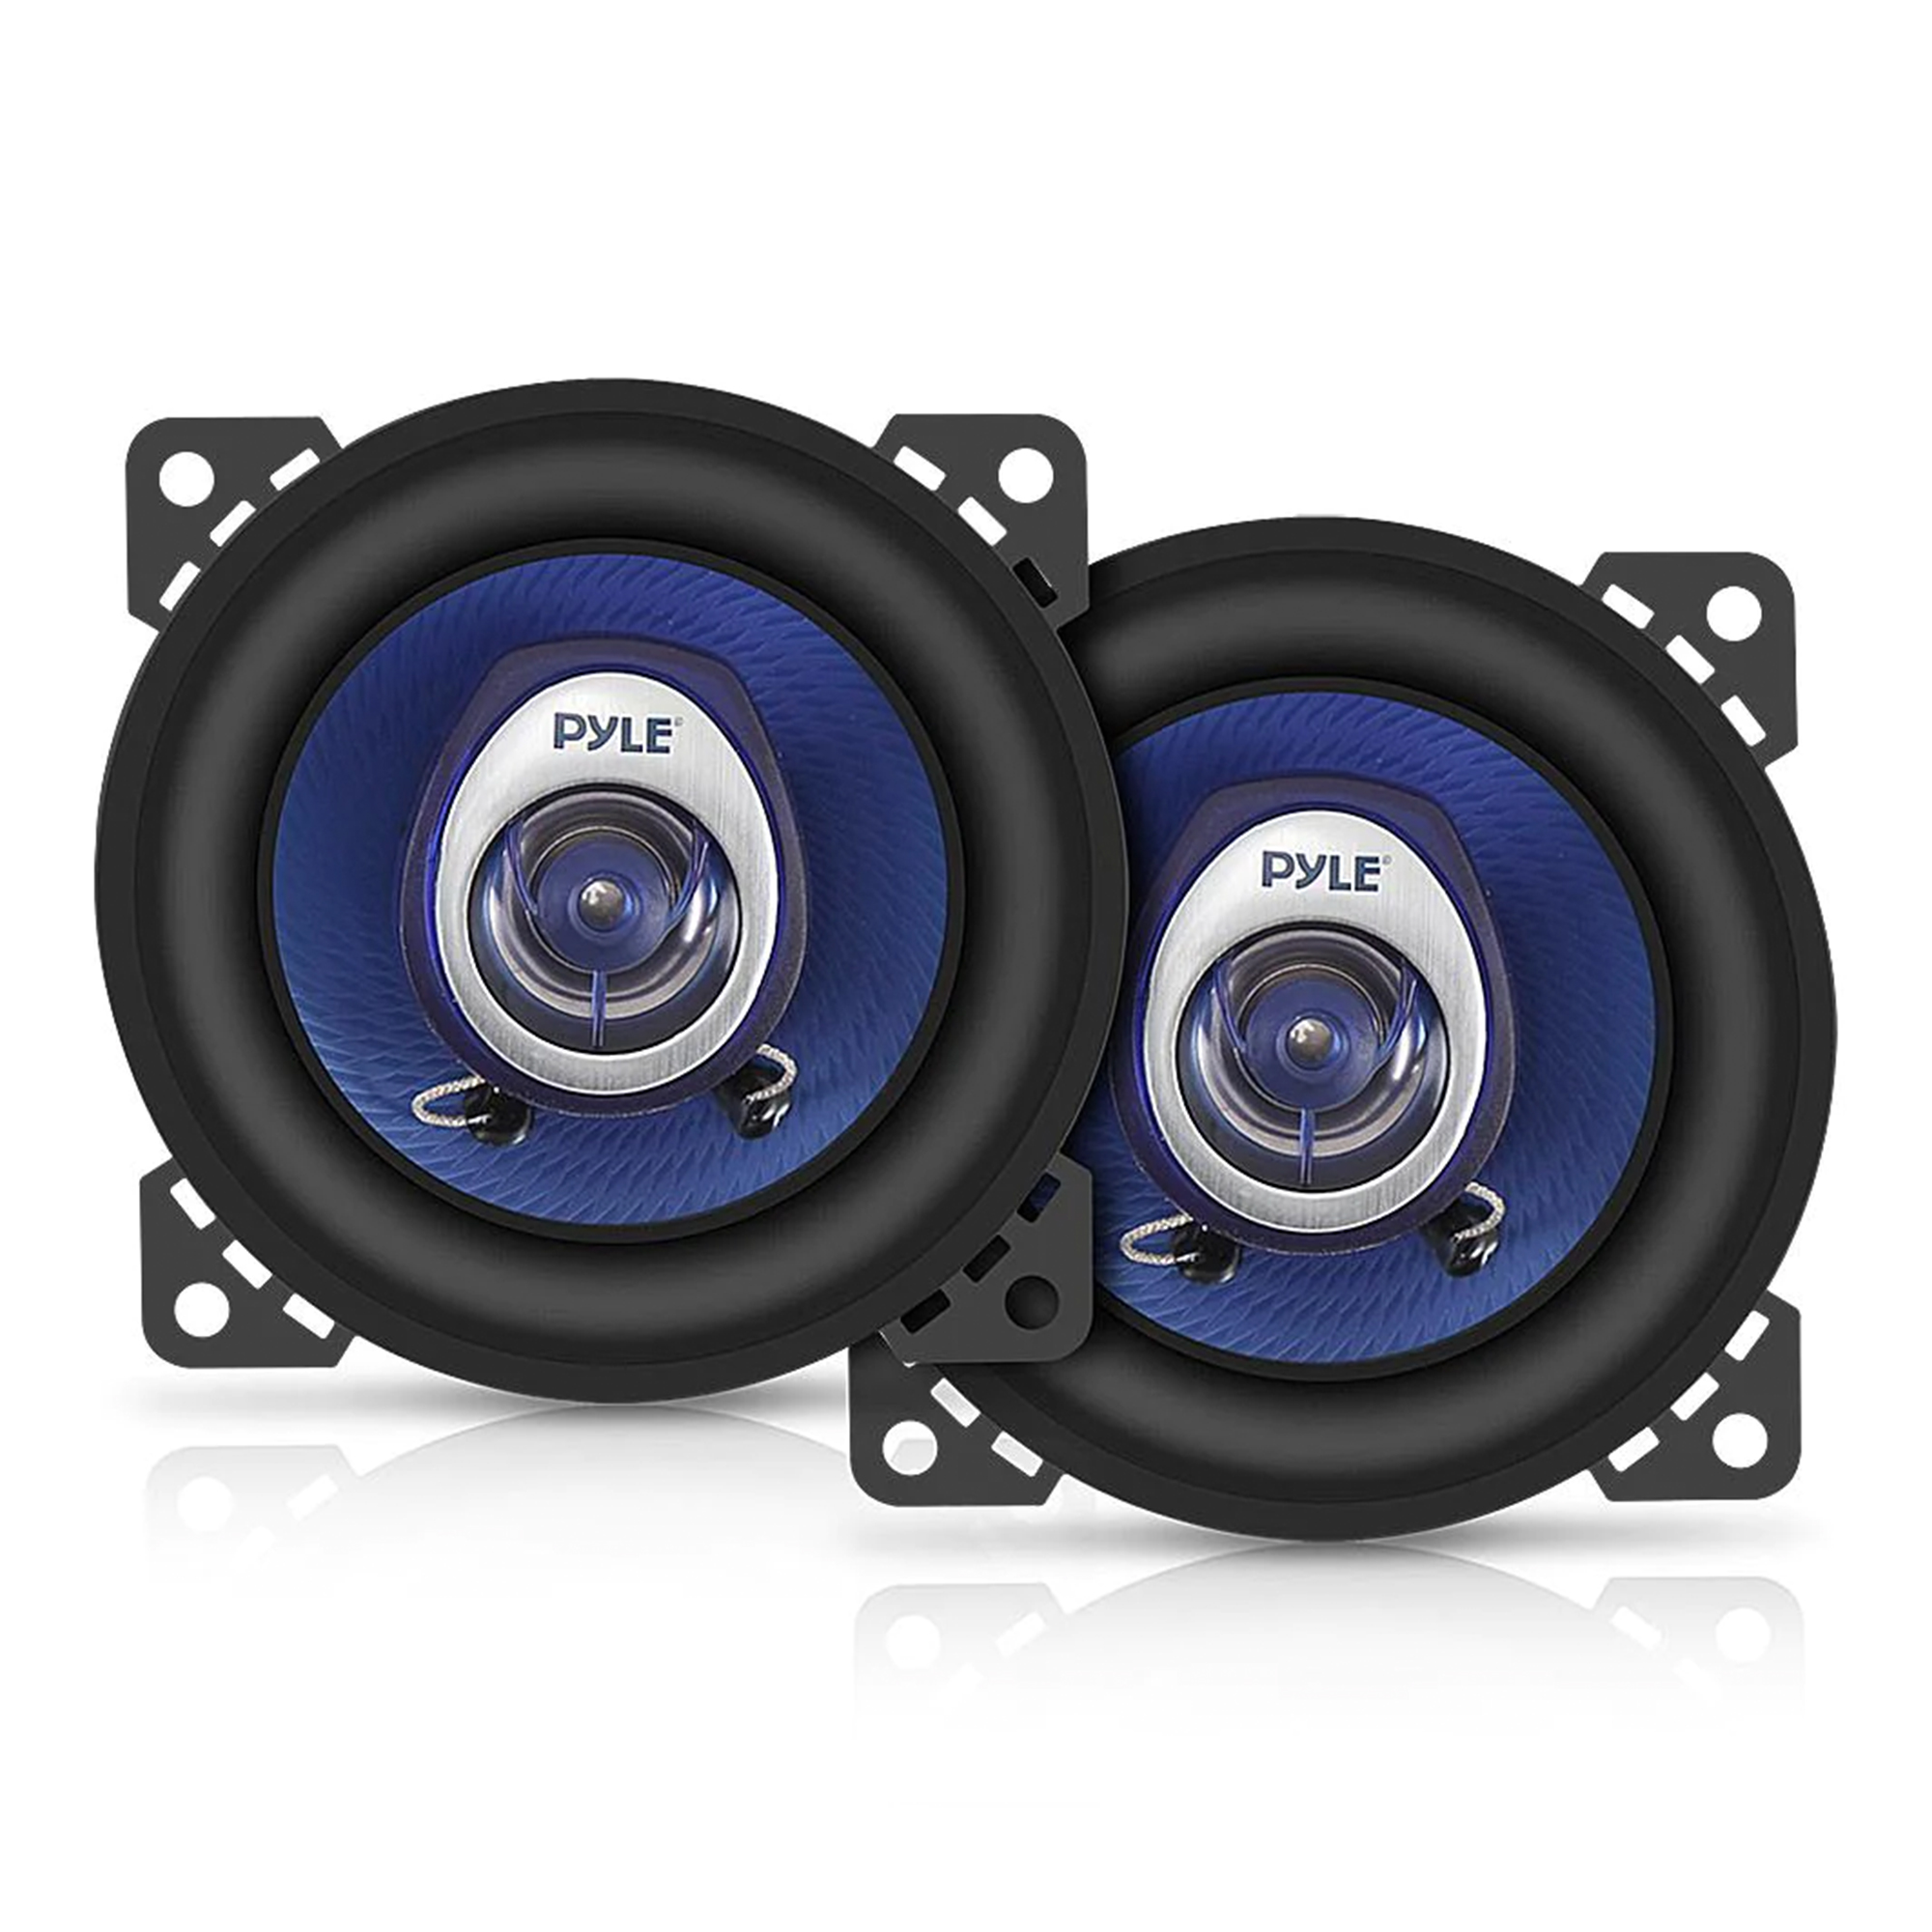 Pyle 4 Inch Poly Injection Cone 2 Way 180 Watt Surround Sound Car Speakers - image 1 of 7